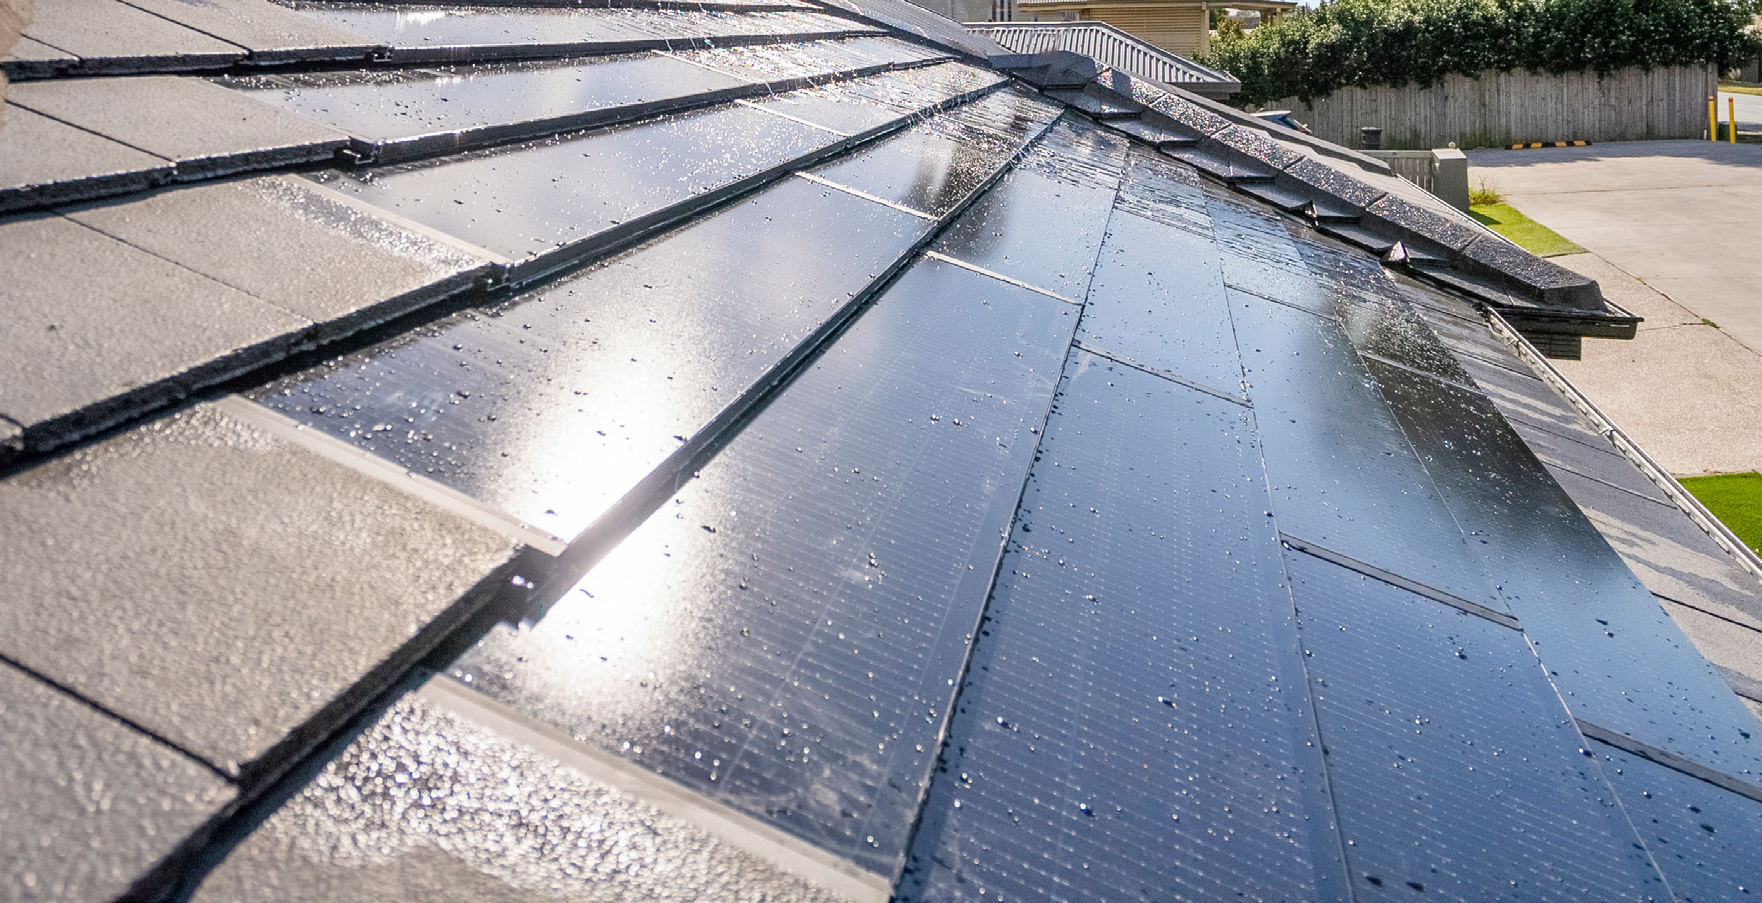 Sunshine Series is an integrated solar roof tile solution for pitched rooftops to replace traditional solar panels and framework for a sleek, aesthetically-
pleasing result.